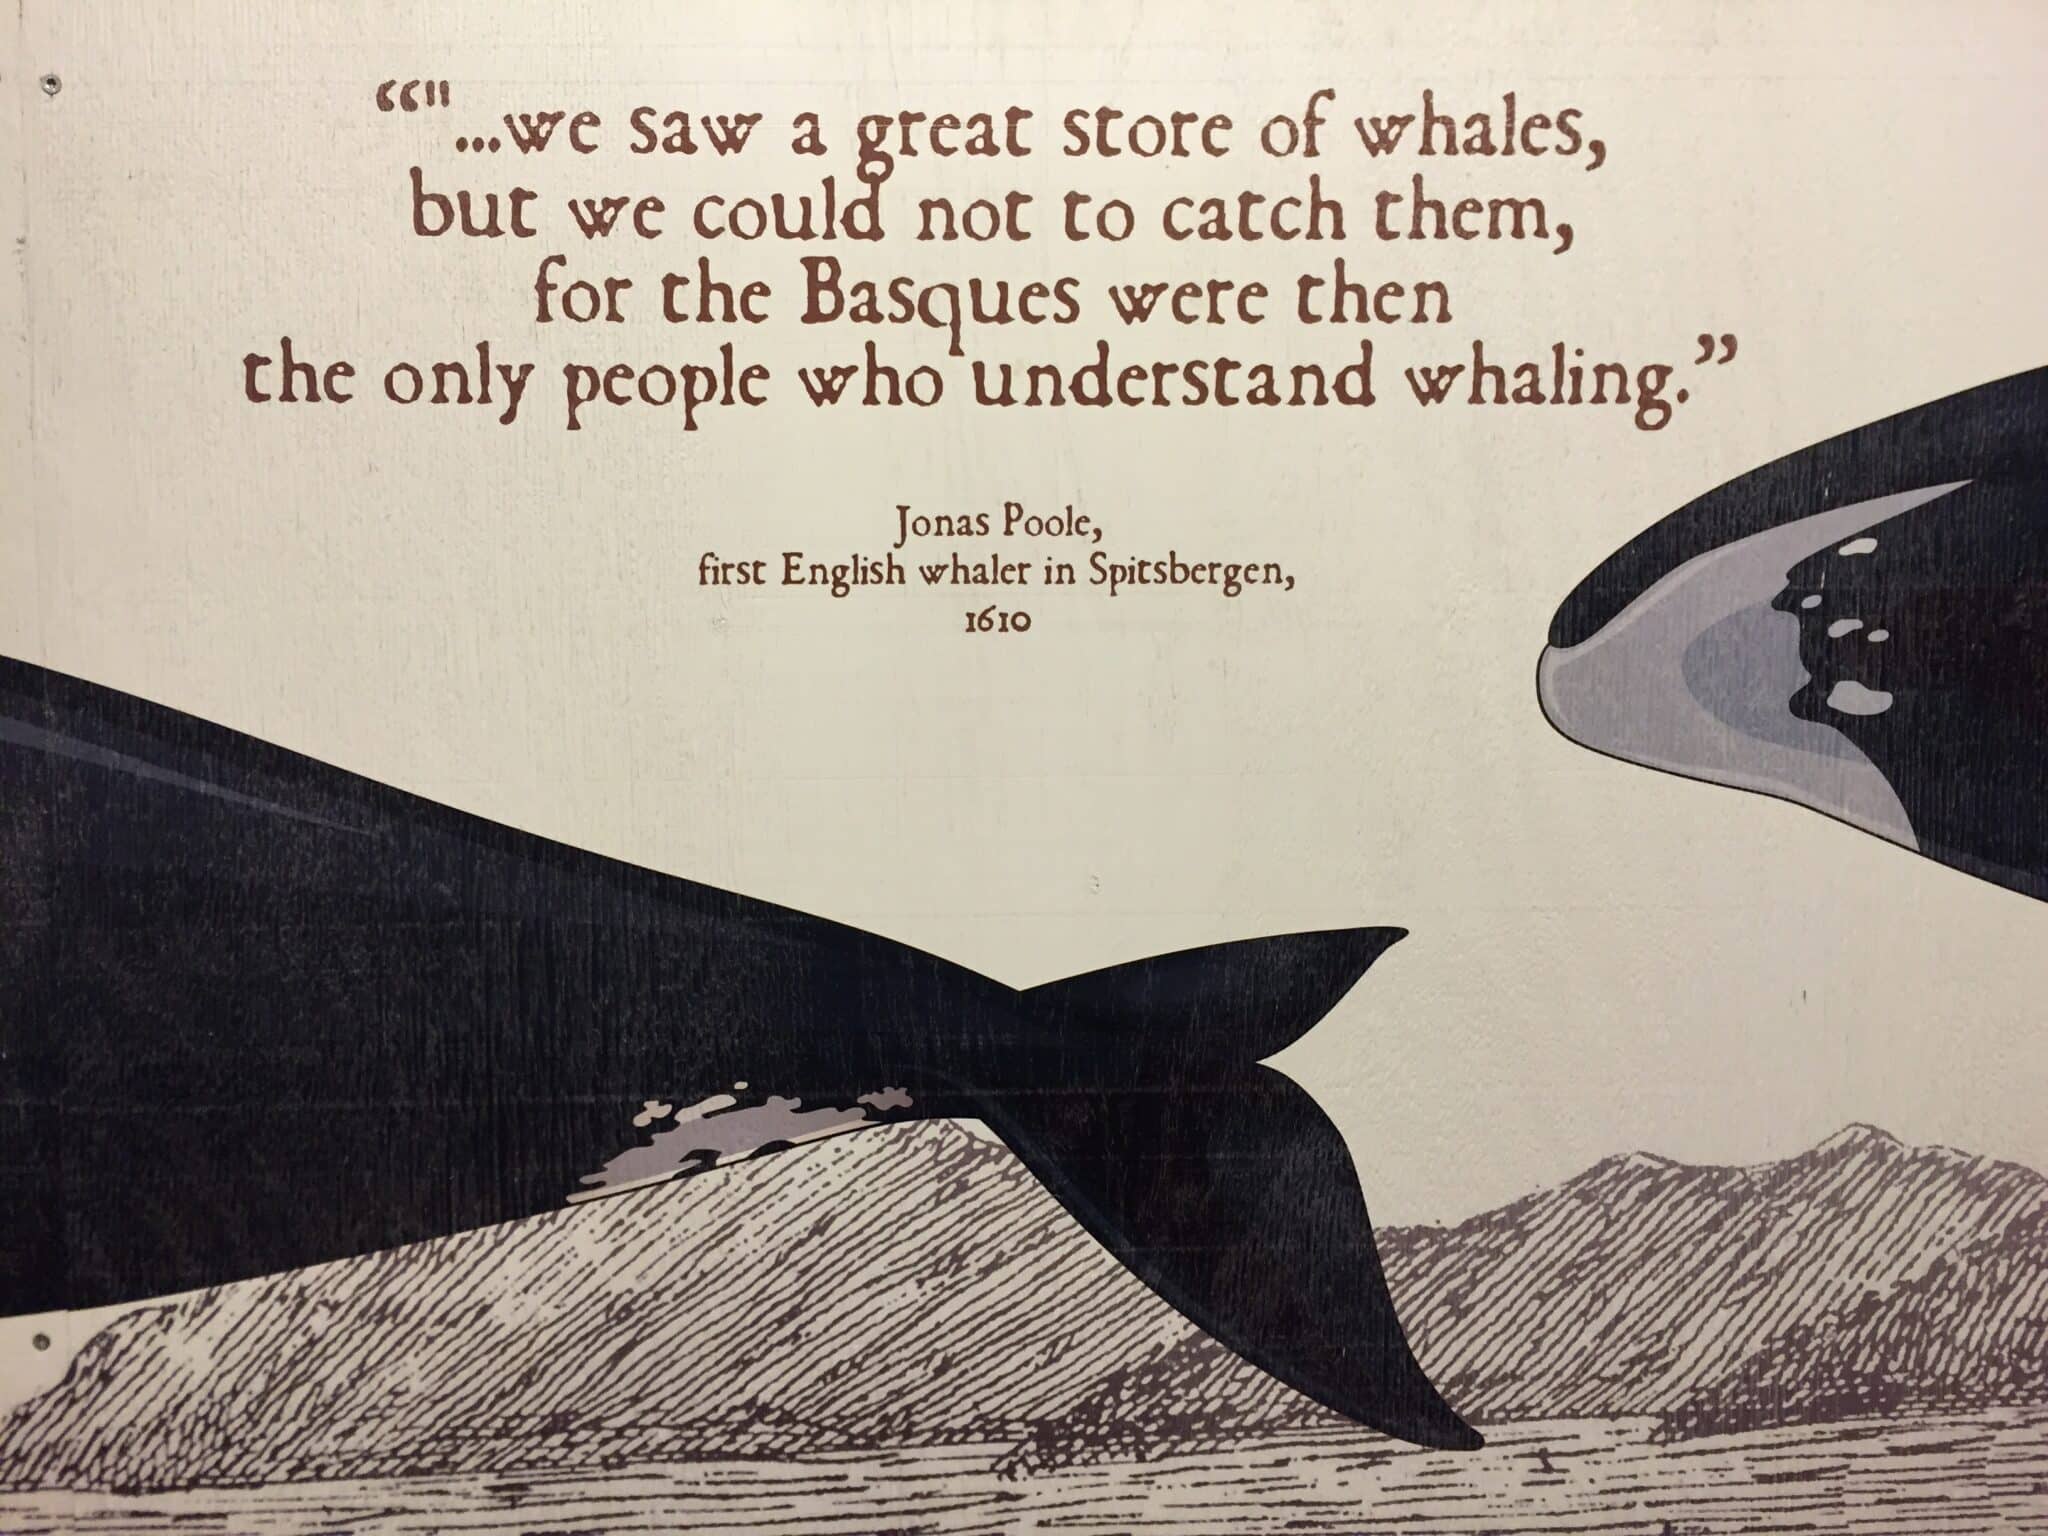 The Basques were whalers